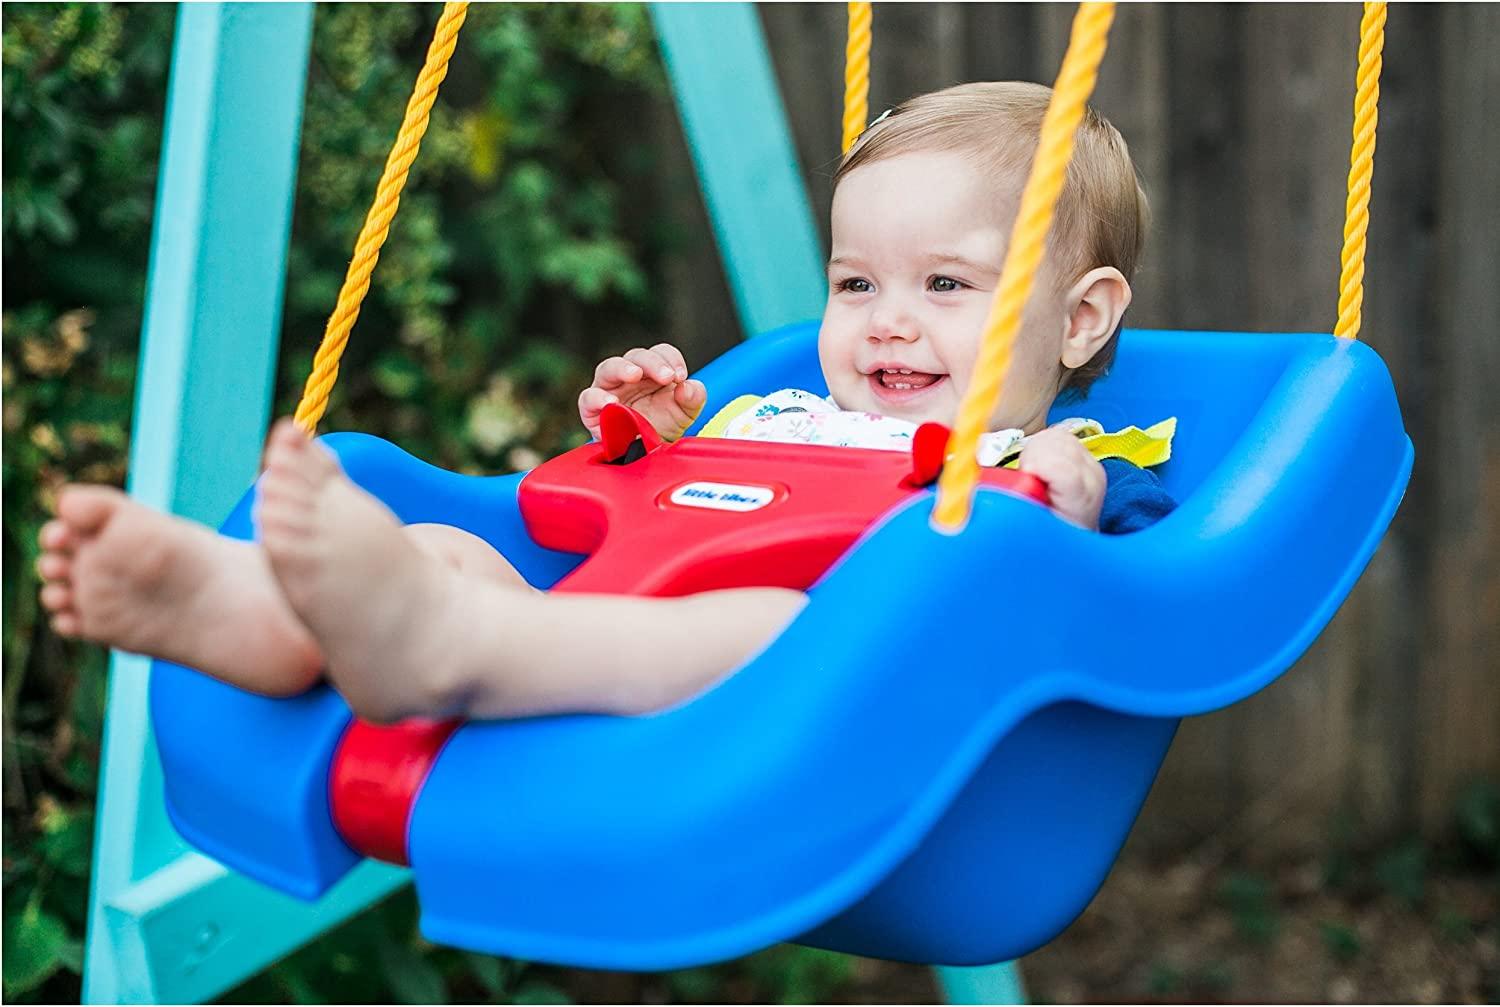 The Little Tikes 2-in-1 snug secure swing is for children who absolutely love to swing - 4aKid